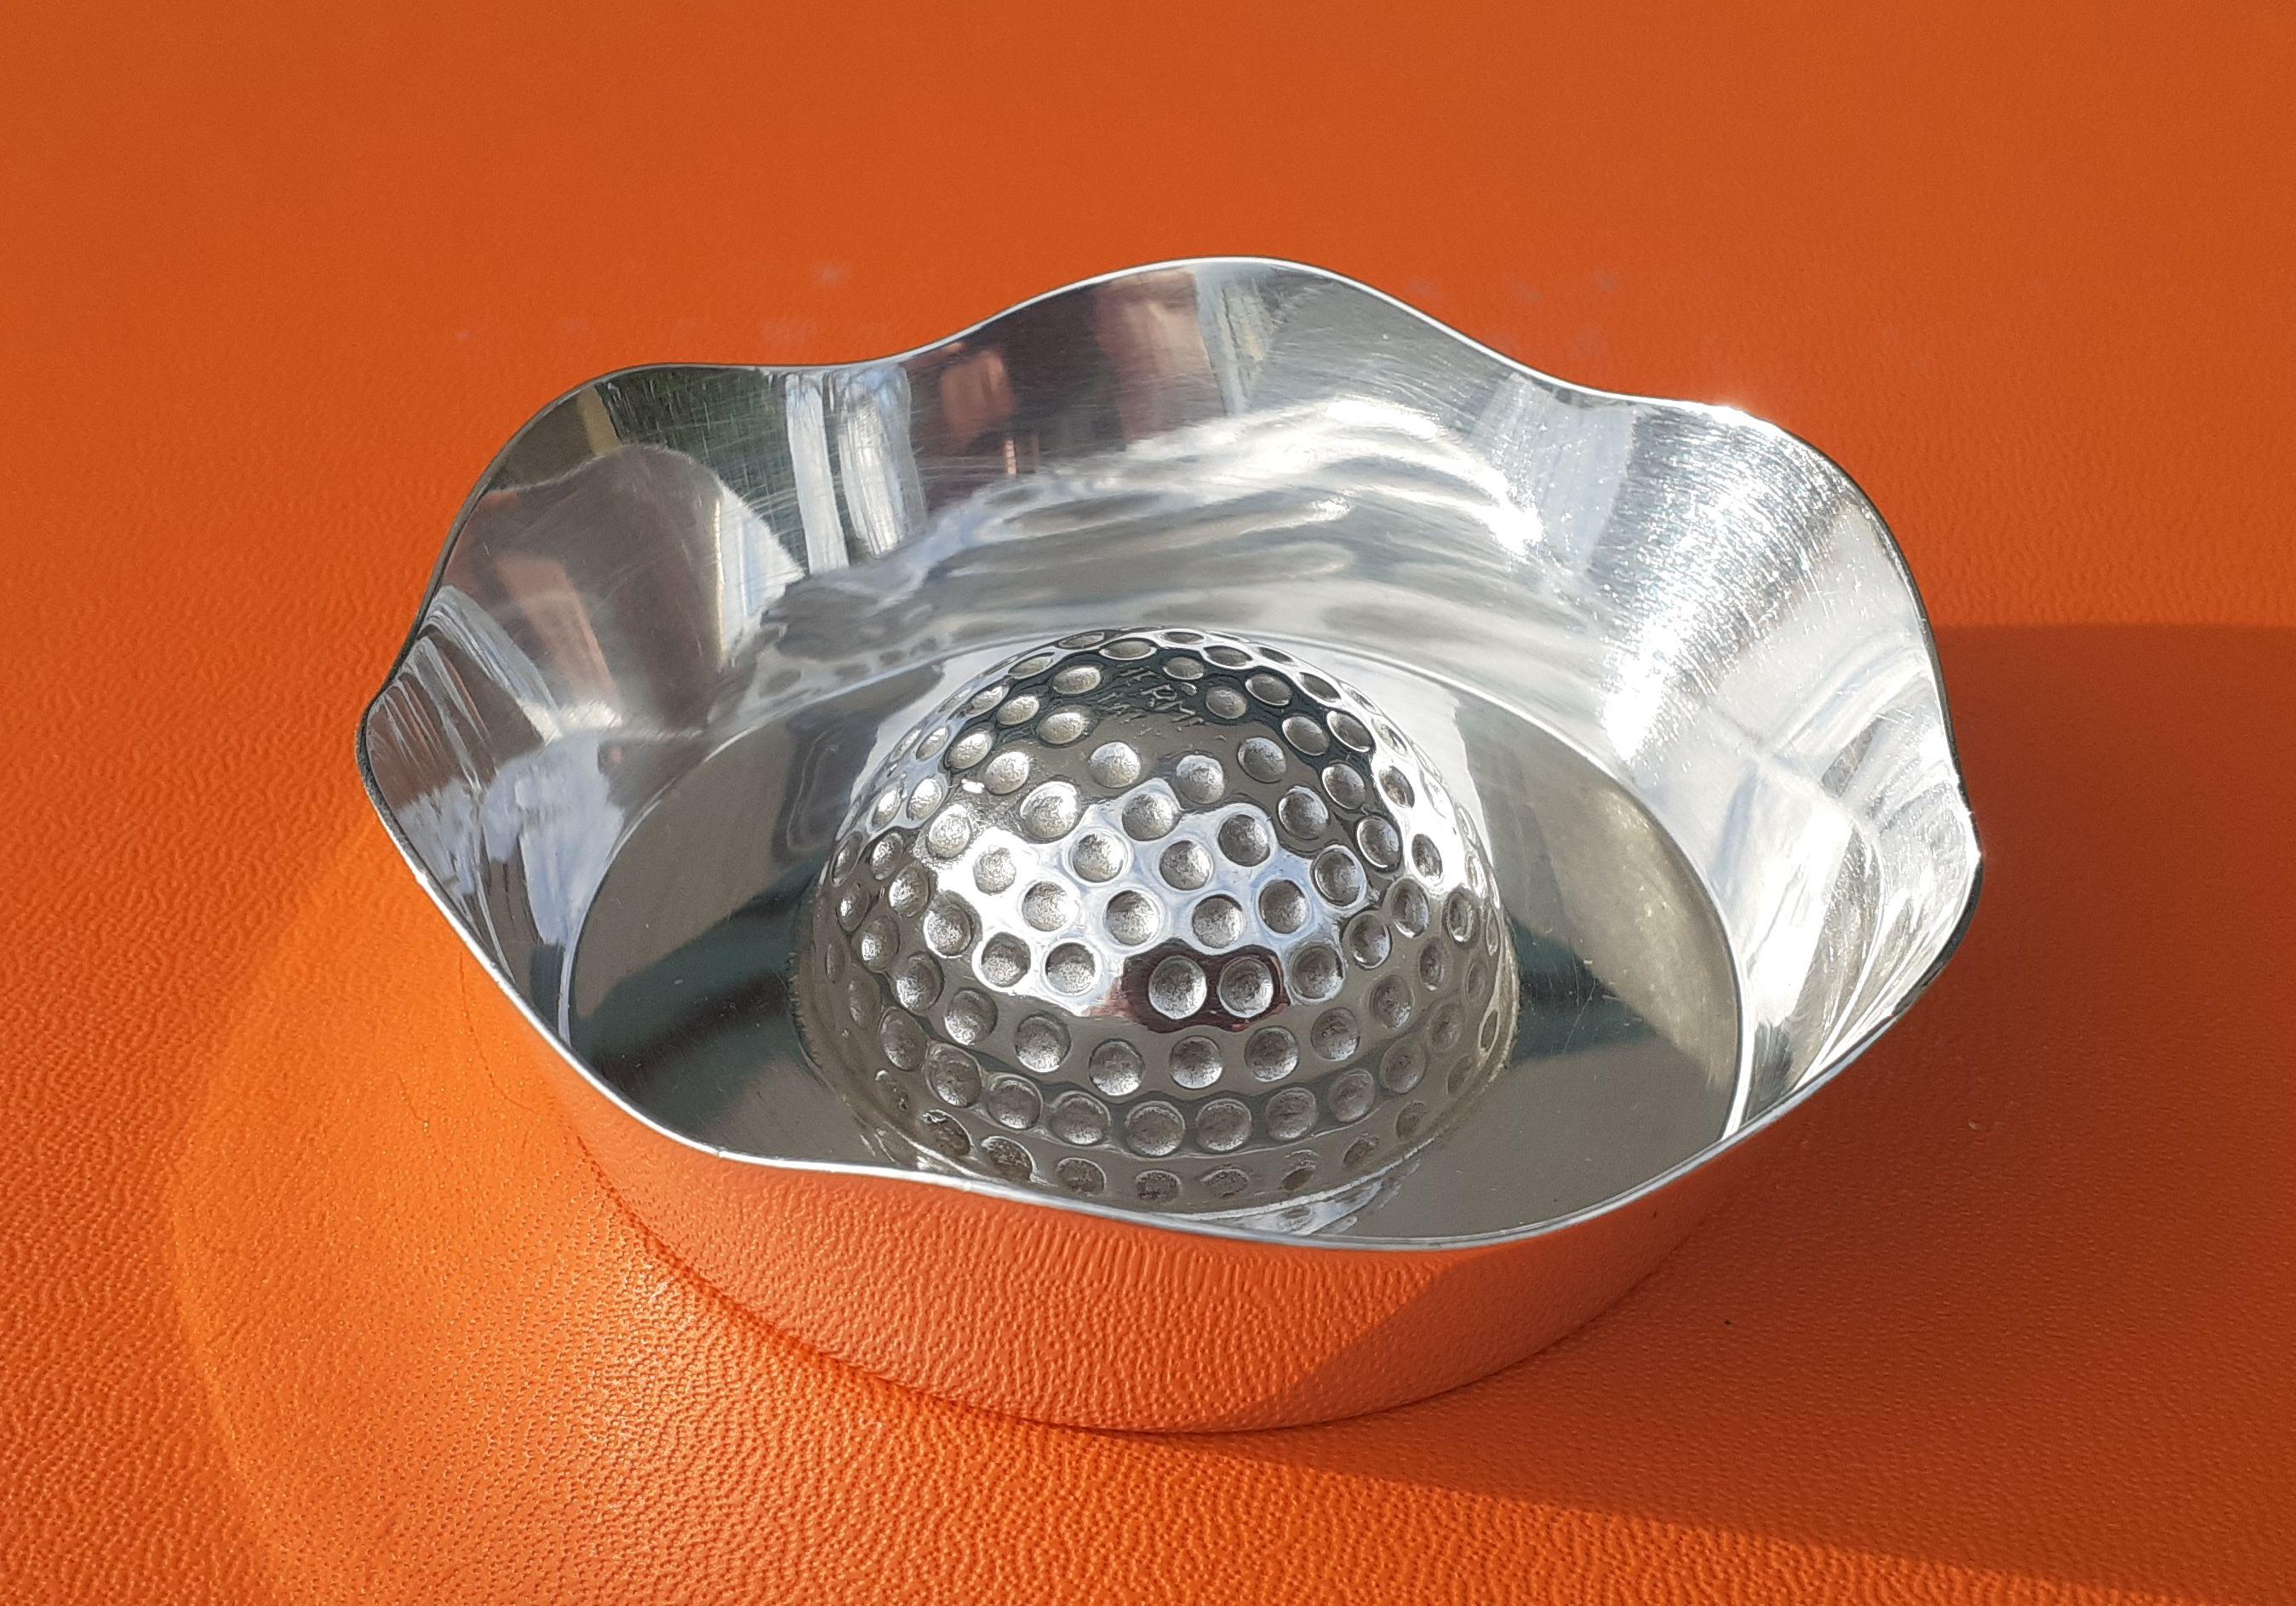 Rare Hermès Ashtray Change Tray Golf Ball Shaped Ravinet d'Enfert in Silver For Sale 2